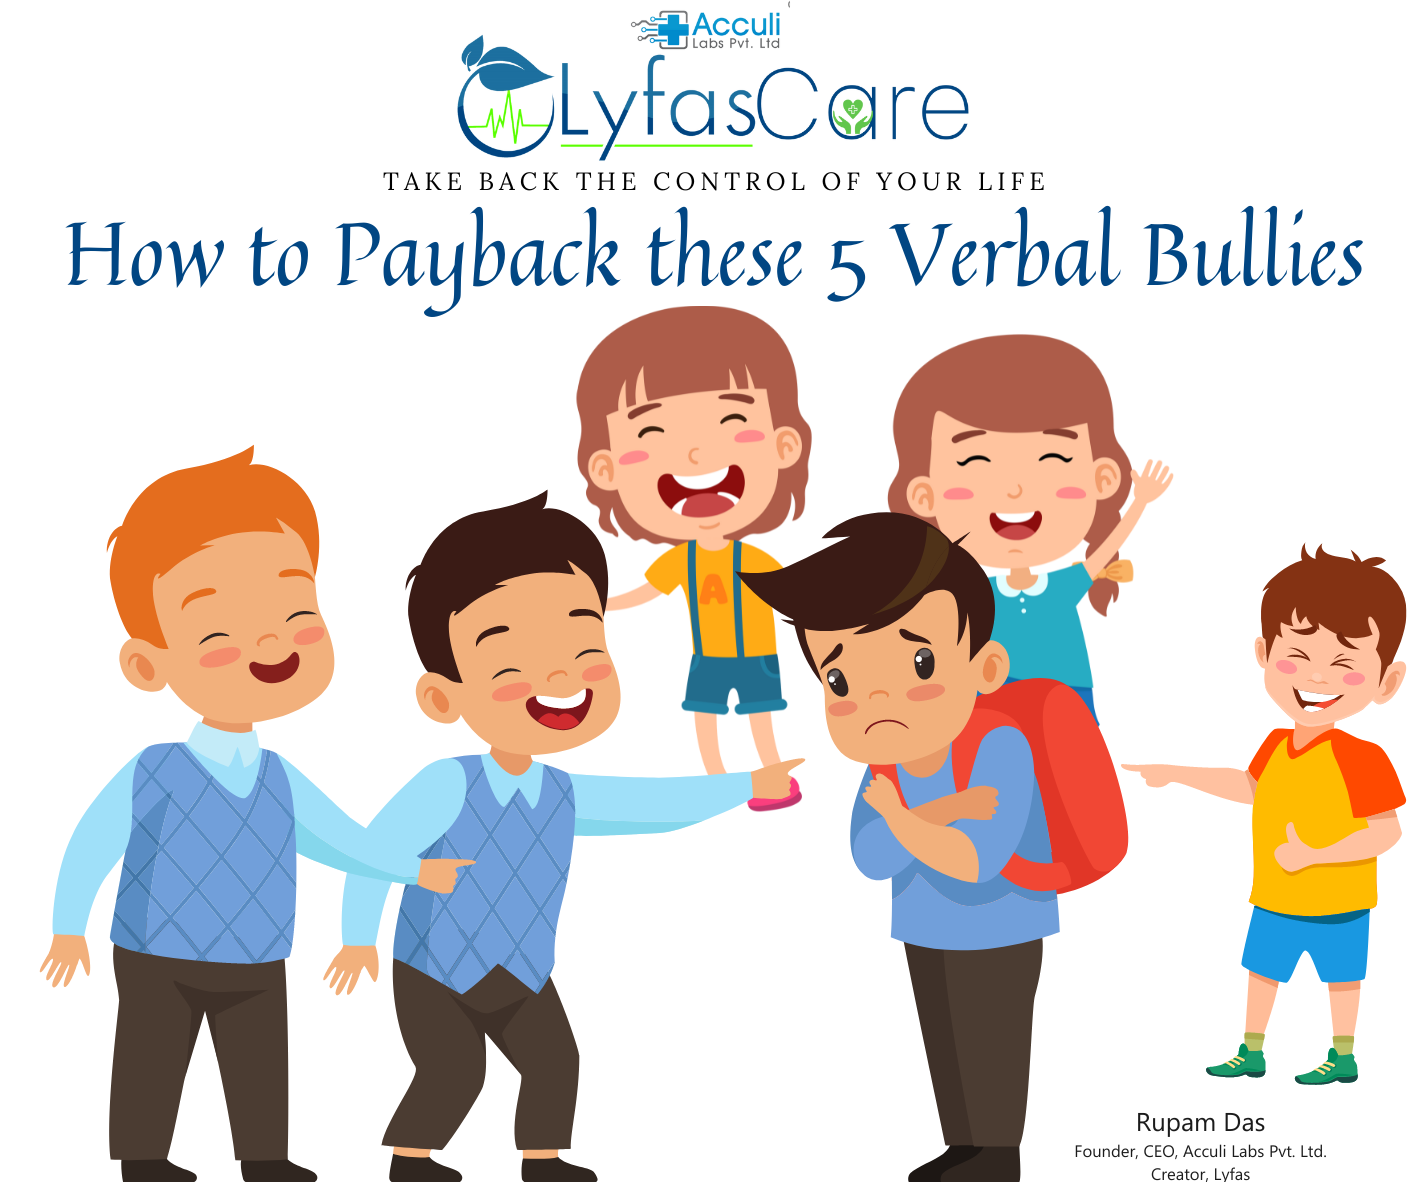 How to Payback these 5 Verbal Bullies